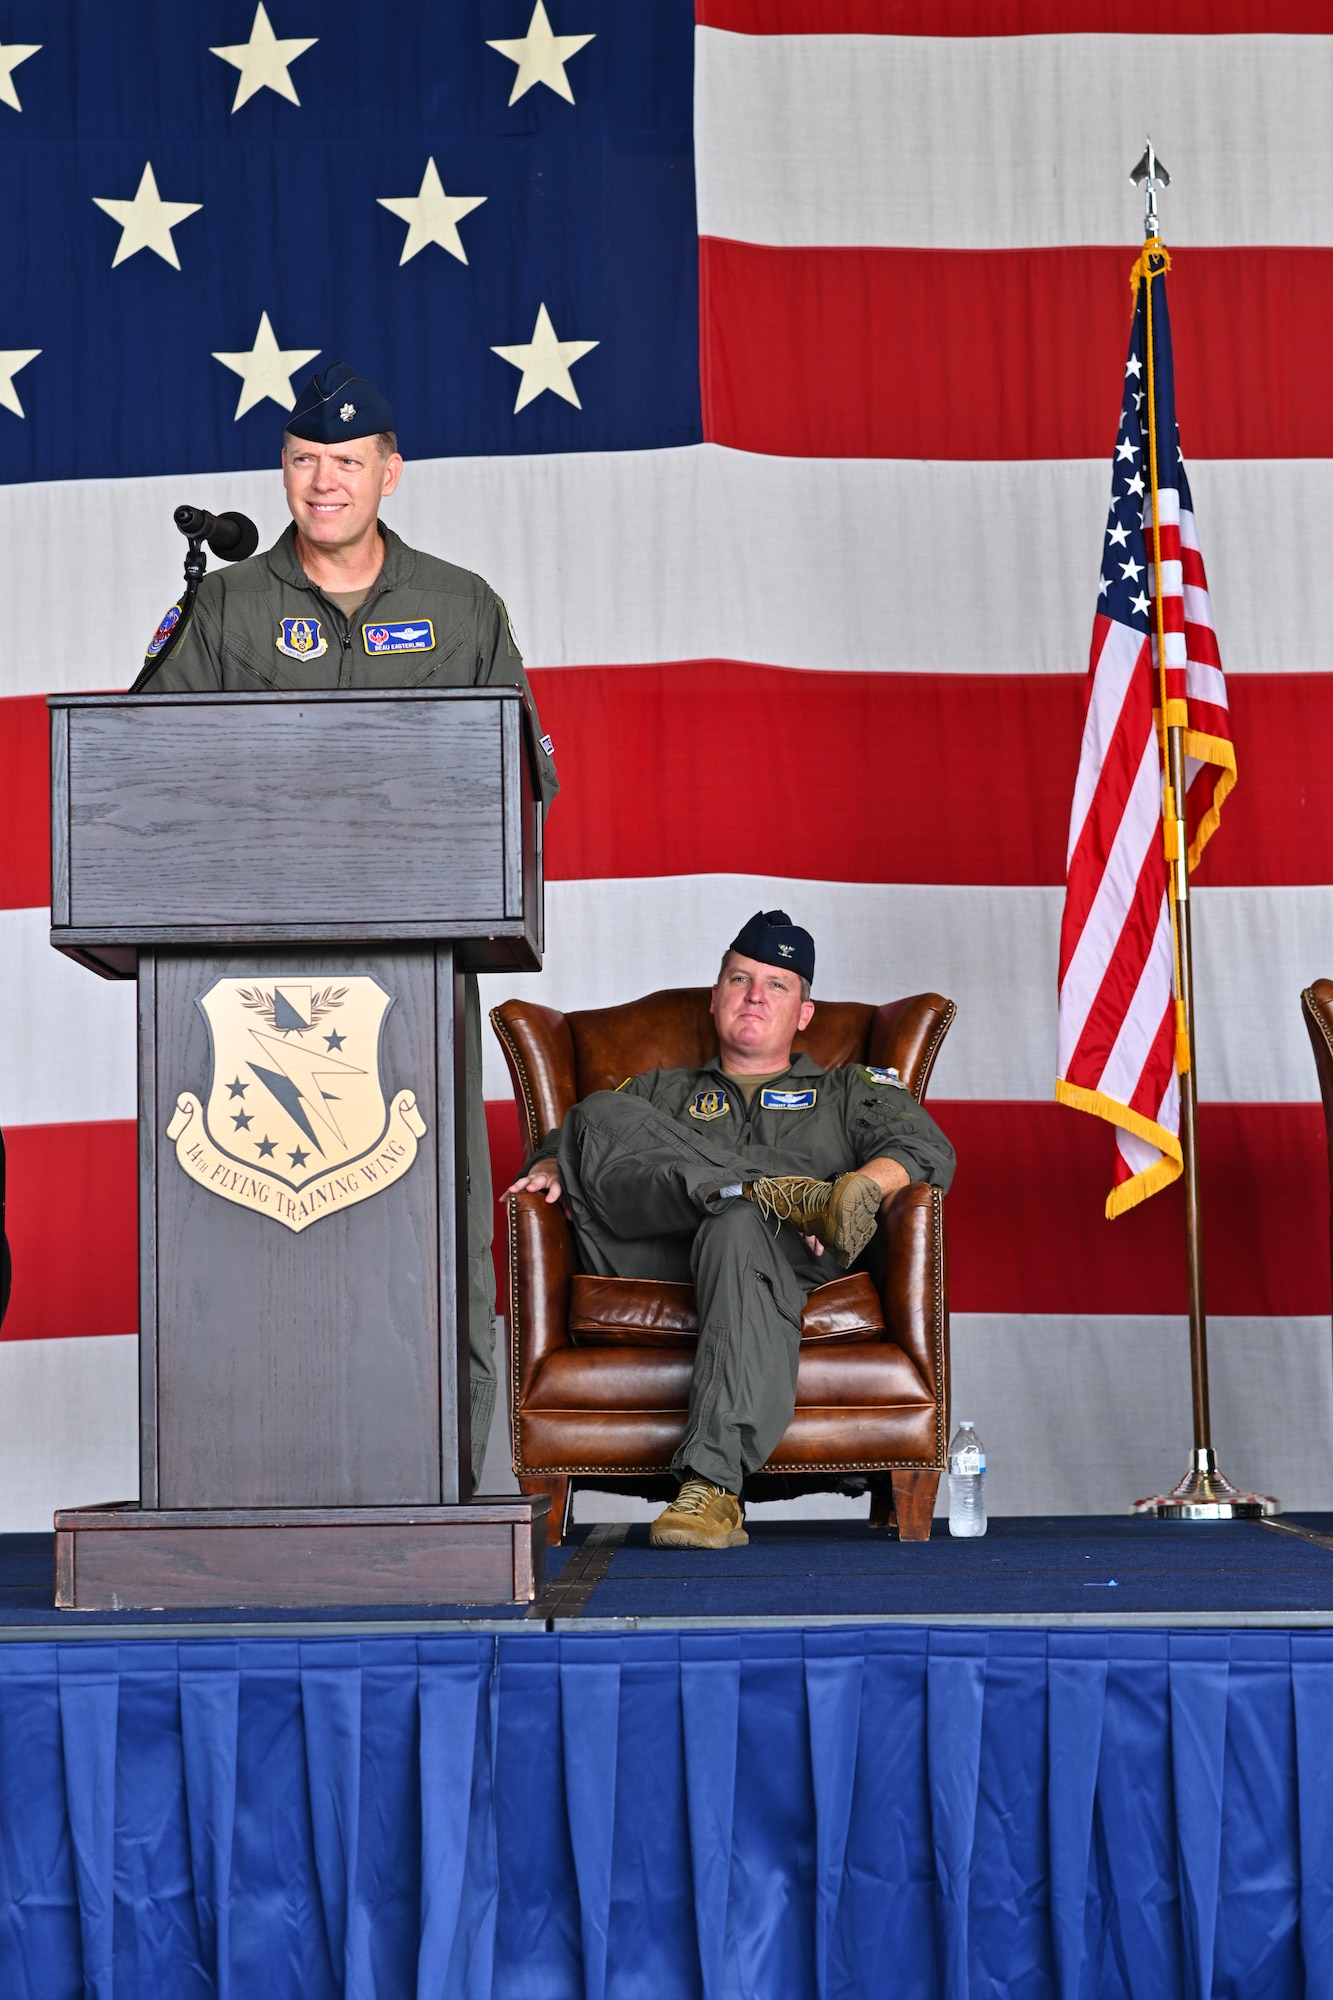 U.S. Air Force Lt. Col. David Easterling, incoming 43rd Flying Training Squadron commander, gives a speech at the 43rd FTS Change of Command ceremony at the Walker Center, Aug. 26, 2021, on Columbus Air Force Base, Miss. The 43rd FTS is an Air Force Reserve unit providing Active Guard Reserve (AGR) and Traditional Reserve (TR) instructor pilots to aid in creating pilots. (U.S. Air Force photo by Senior Airman Jake Jacobsen)